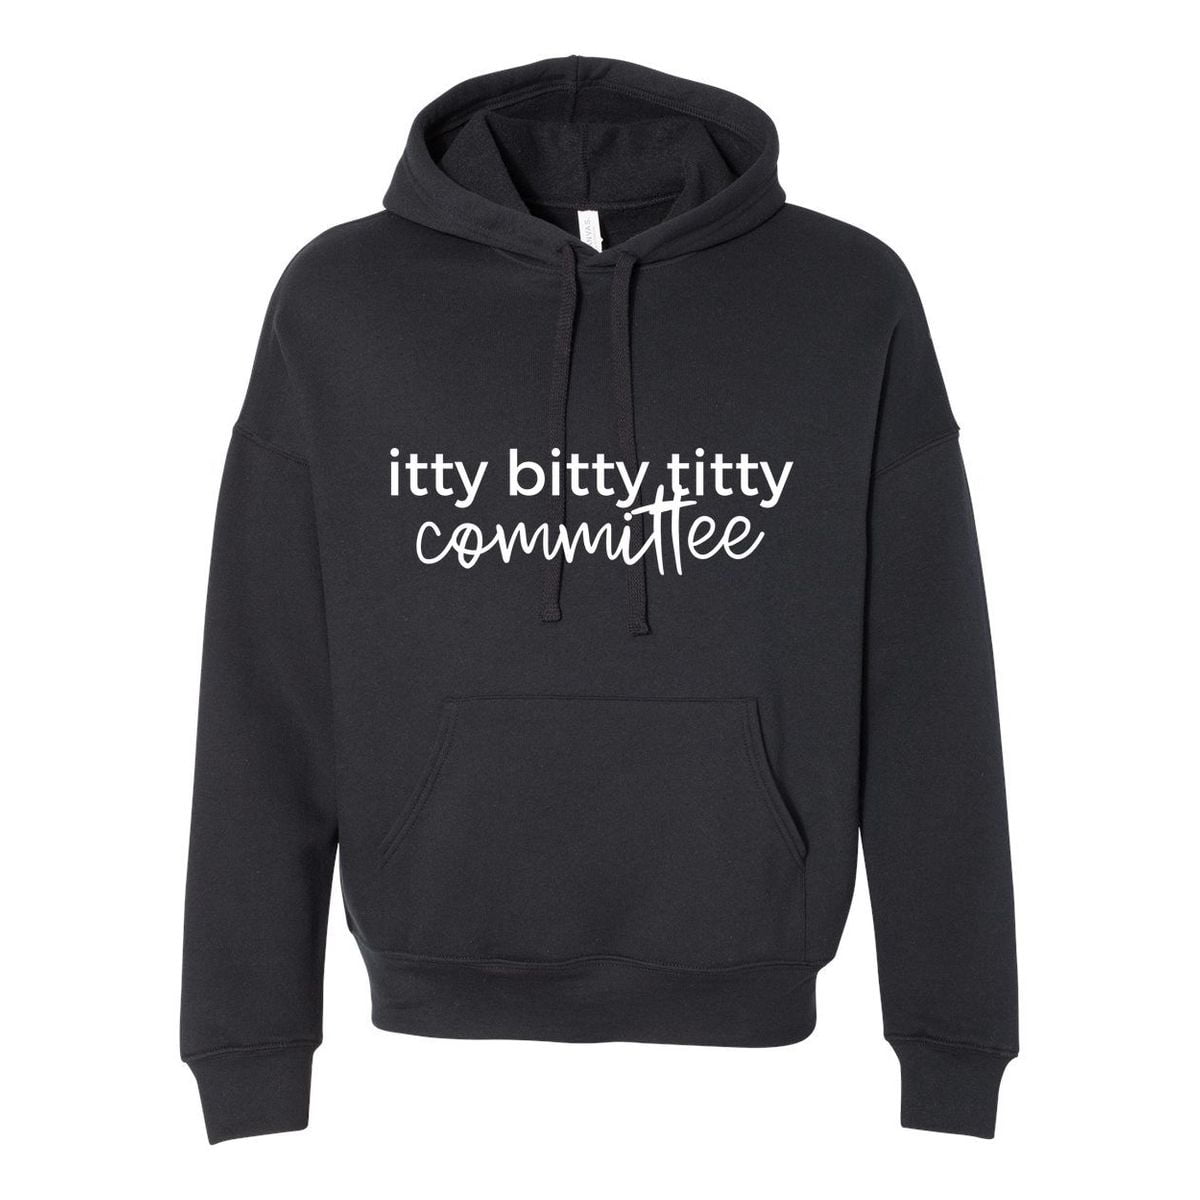 Quote Humour Itty bitty titty committee Pullover Hoodie Funny